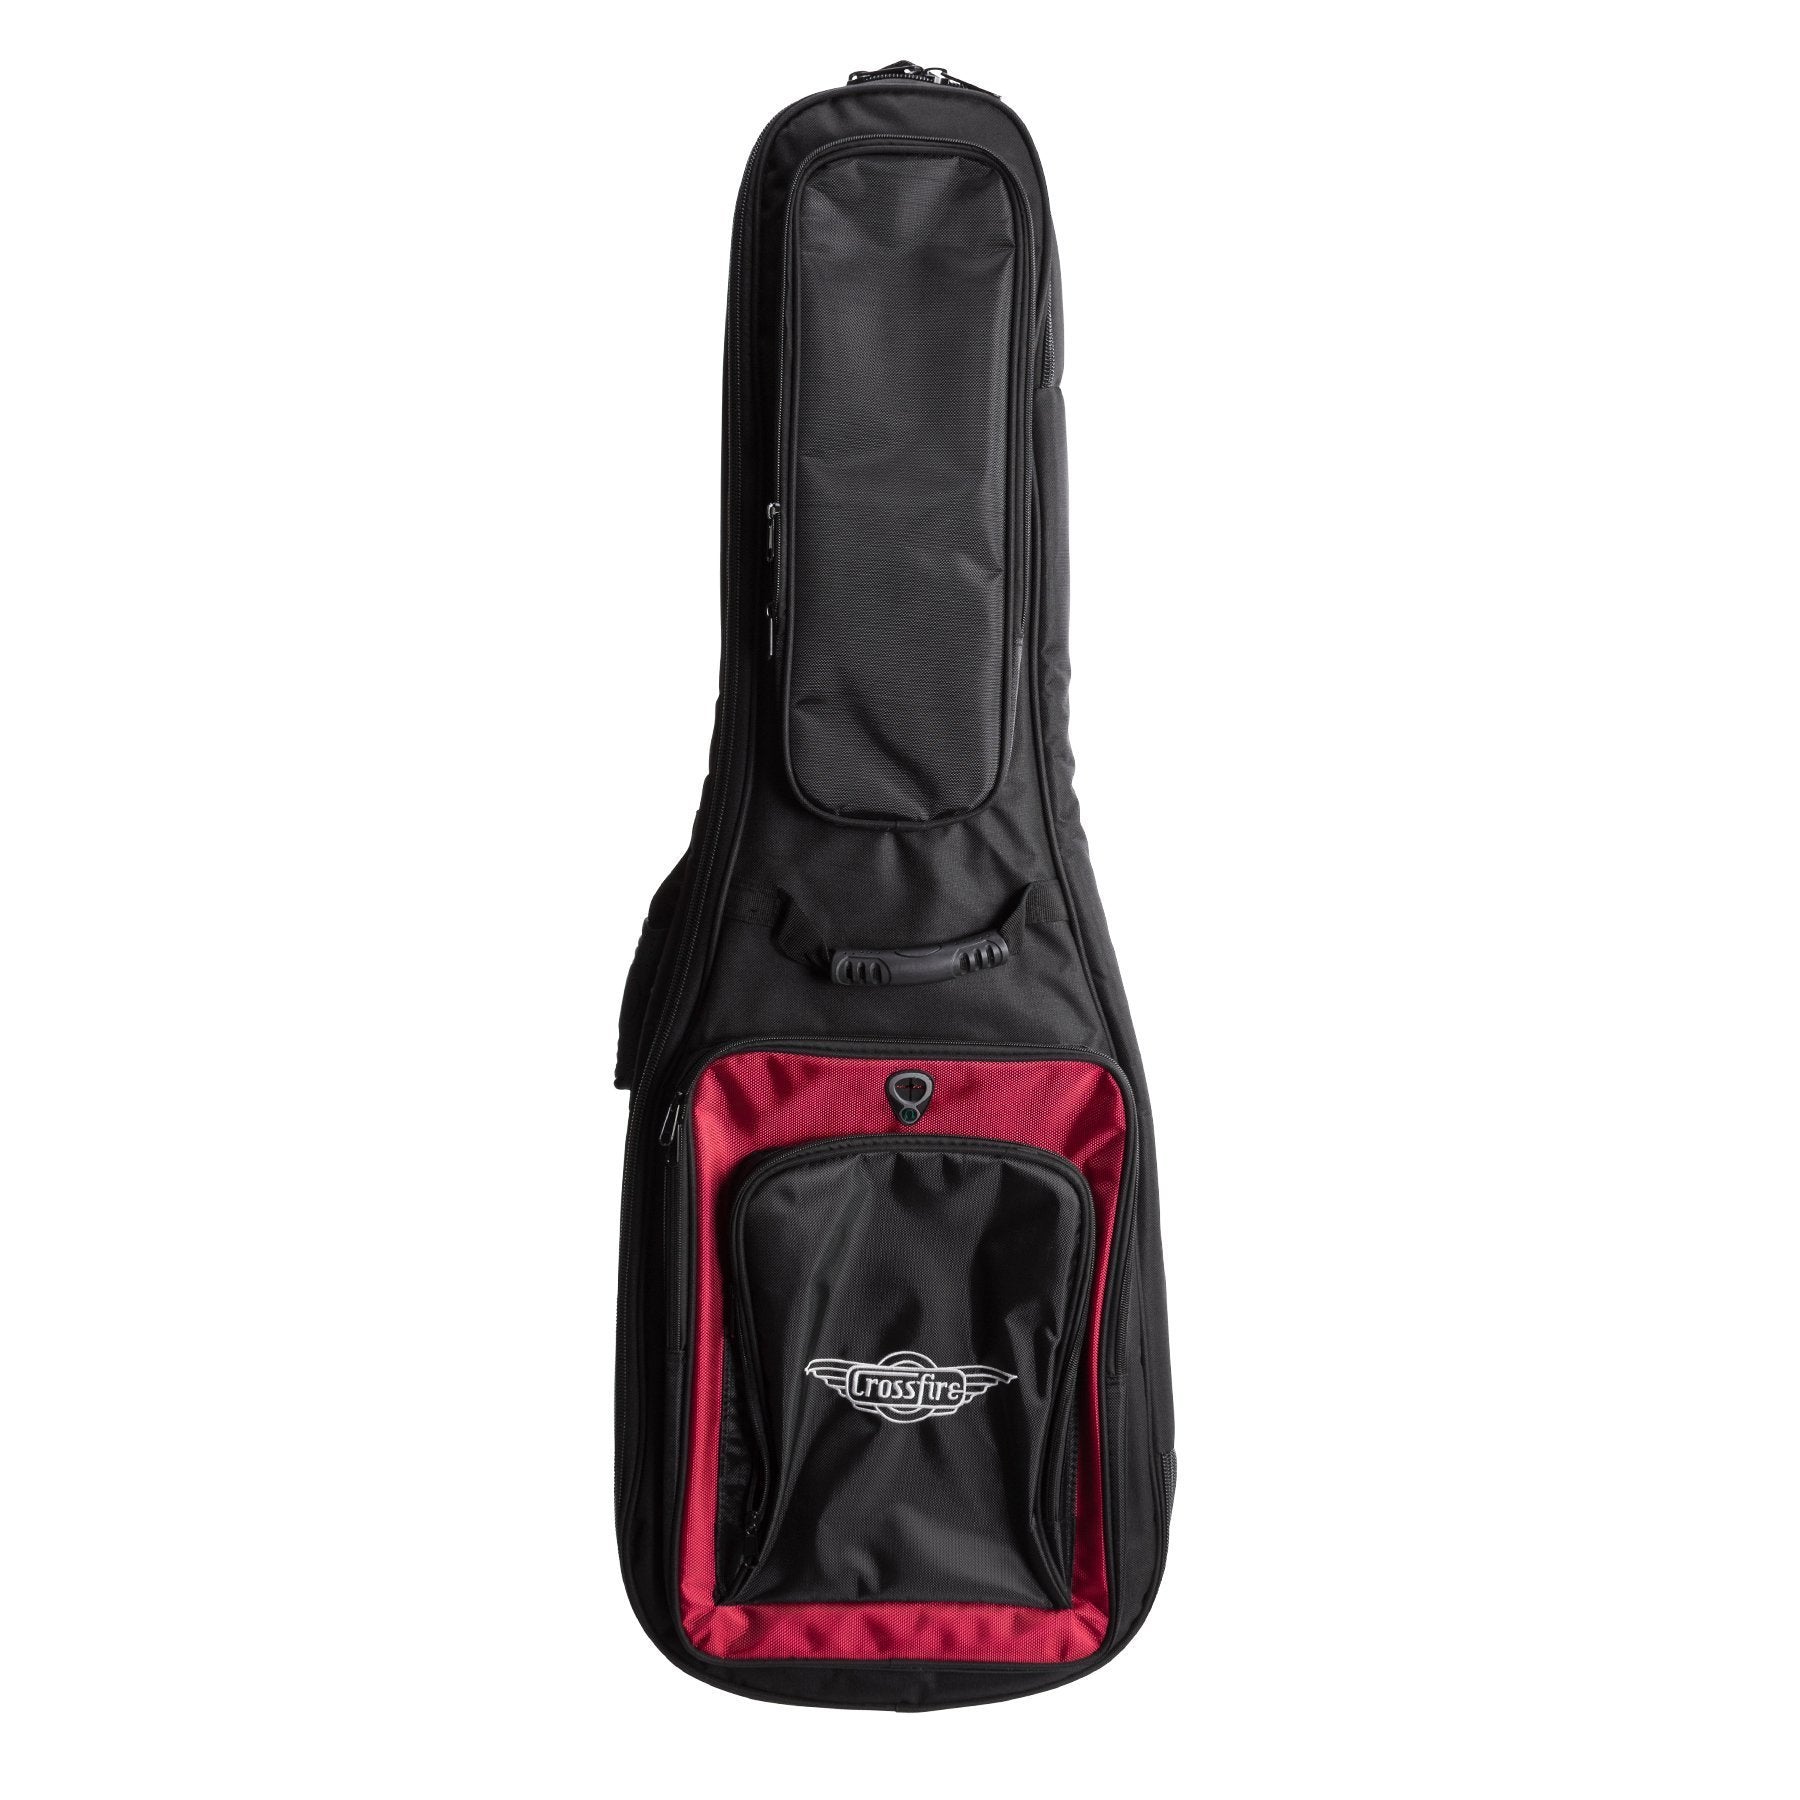 Crossfire Deluxe Padded Electric Guitar Gig Bag (Black)-XFGB-DE-BLK